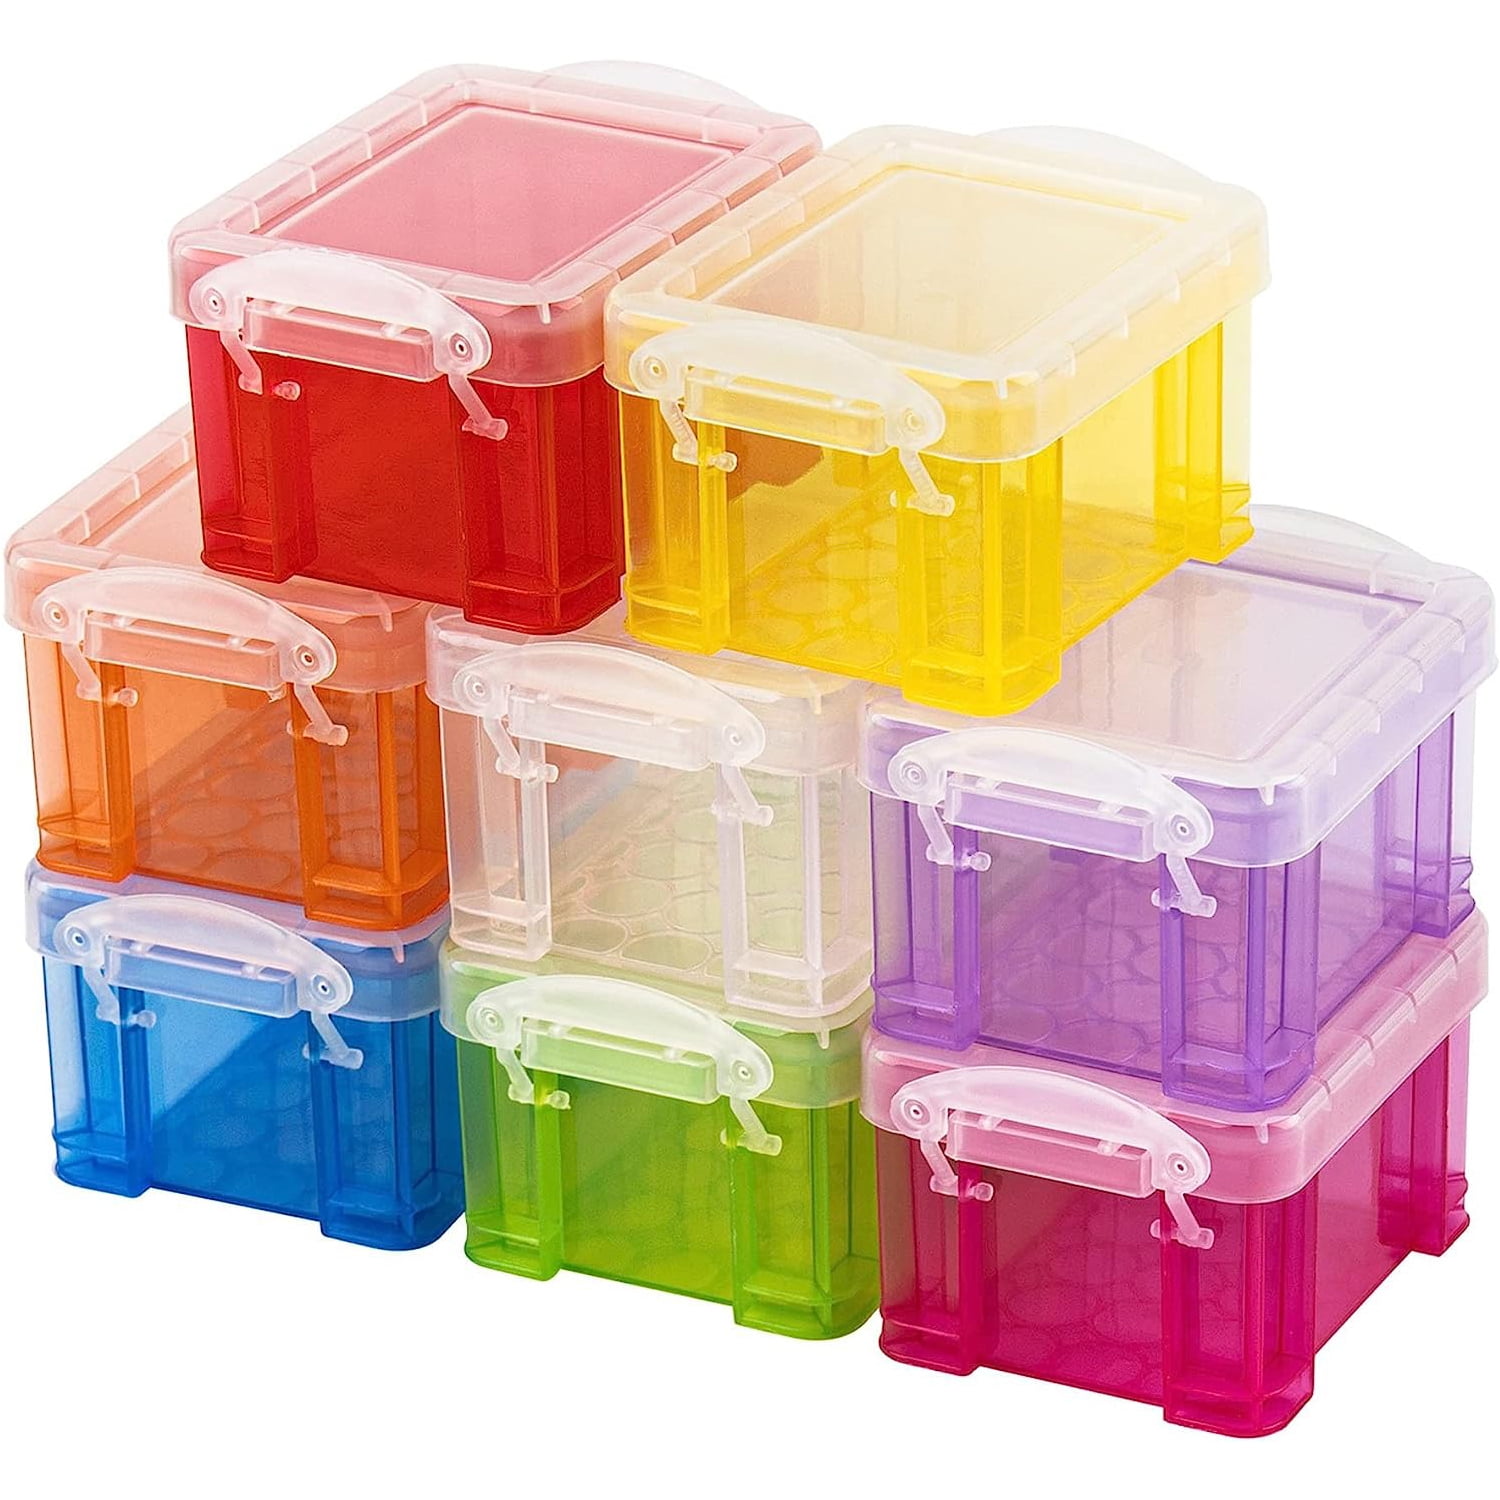 Sepamoon 9 Piece Colorful Crayon Box Storage Case Plastic Organizer  Container with Lid, 5.3'' x 2.9'' x 1.9'', 8 Color, red, yellow, green,  blue